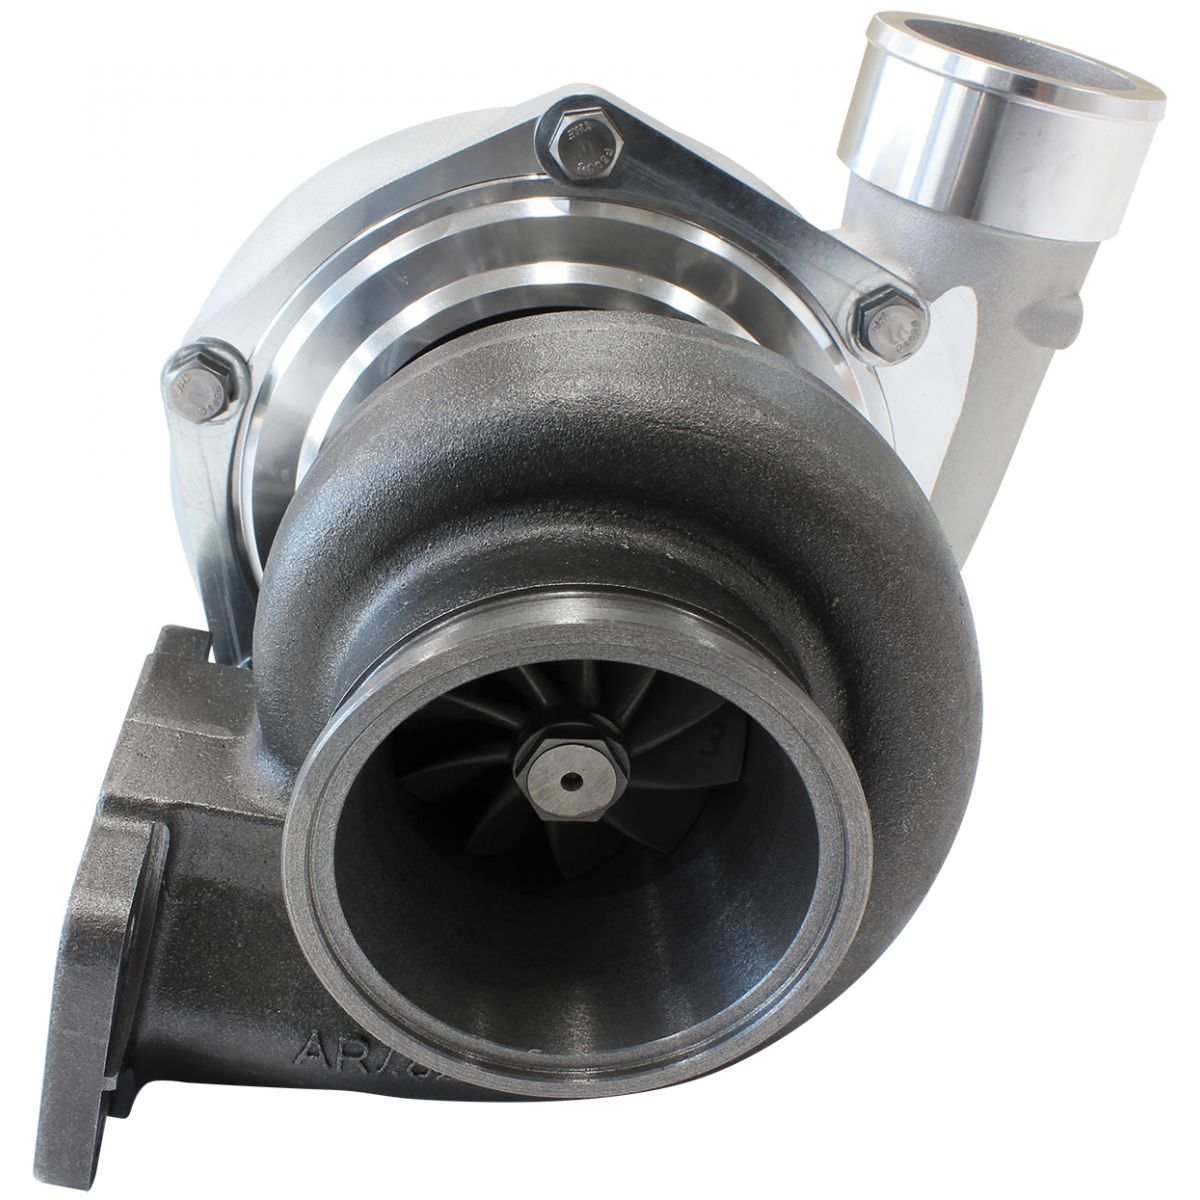 Aeroflow Boosted - 6662 Turbocharger (SILVER)